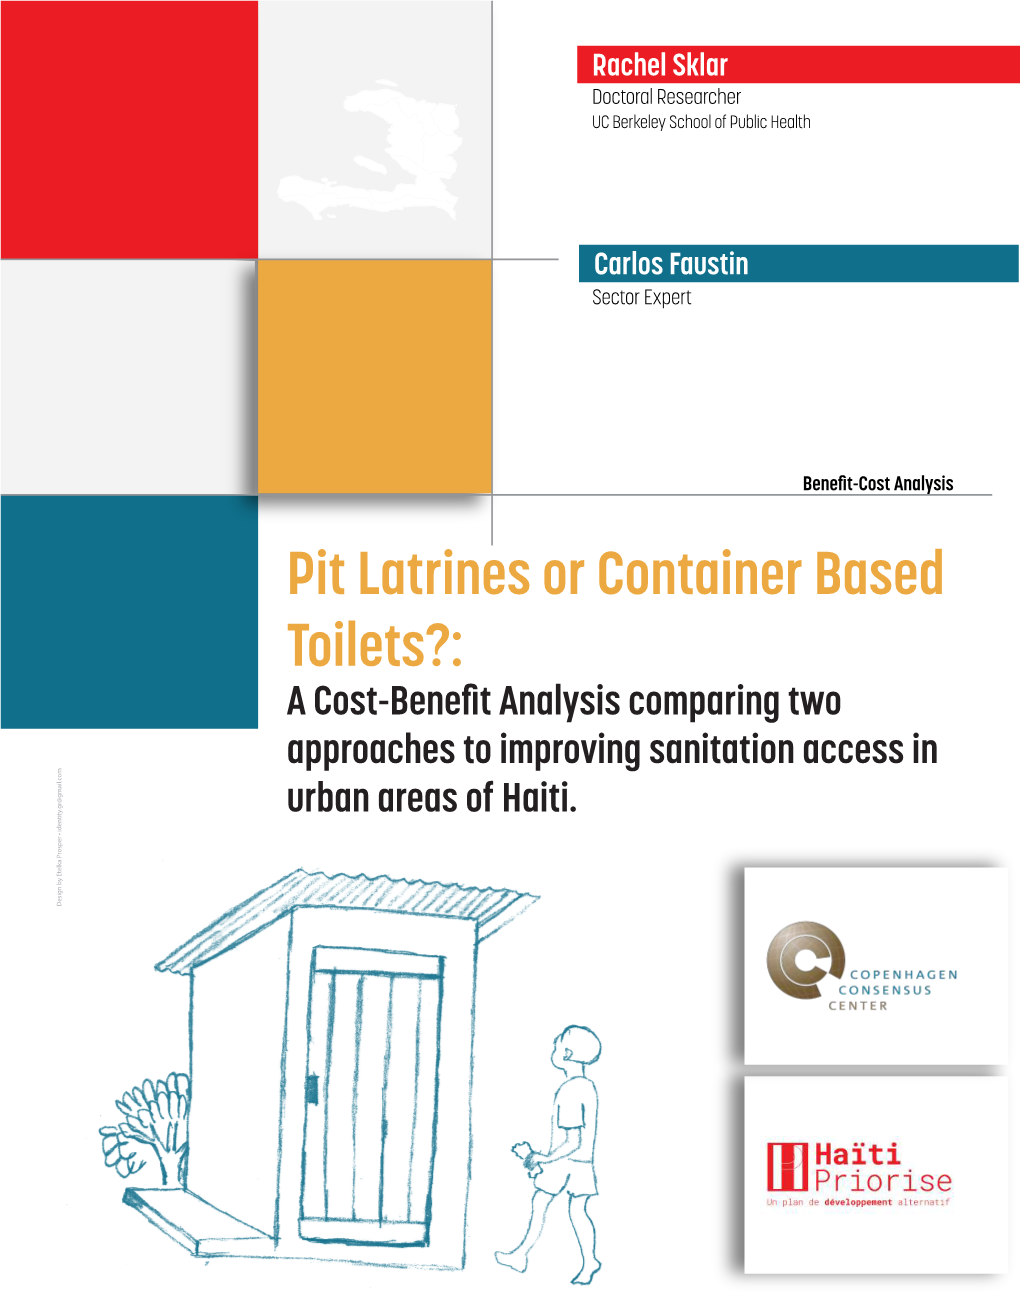 Pit Latrines Or Container Based Toilets?: a Cost-Beneﬁt Analysis Comparing Two Approaches to Improving Sanitation Access in Urban Areas of Haiti